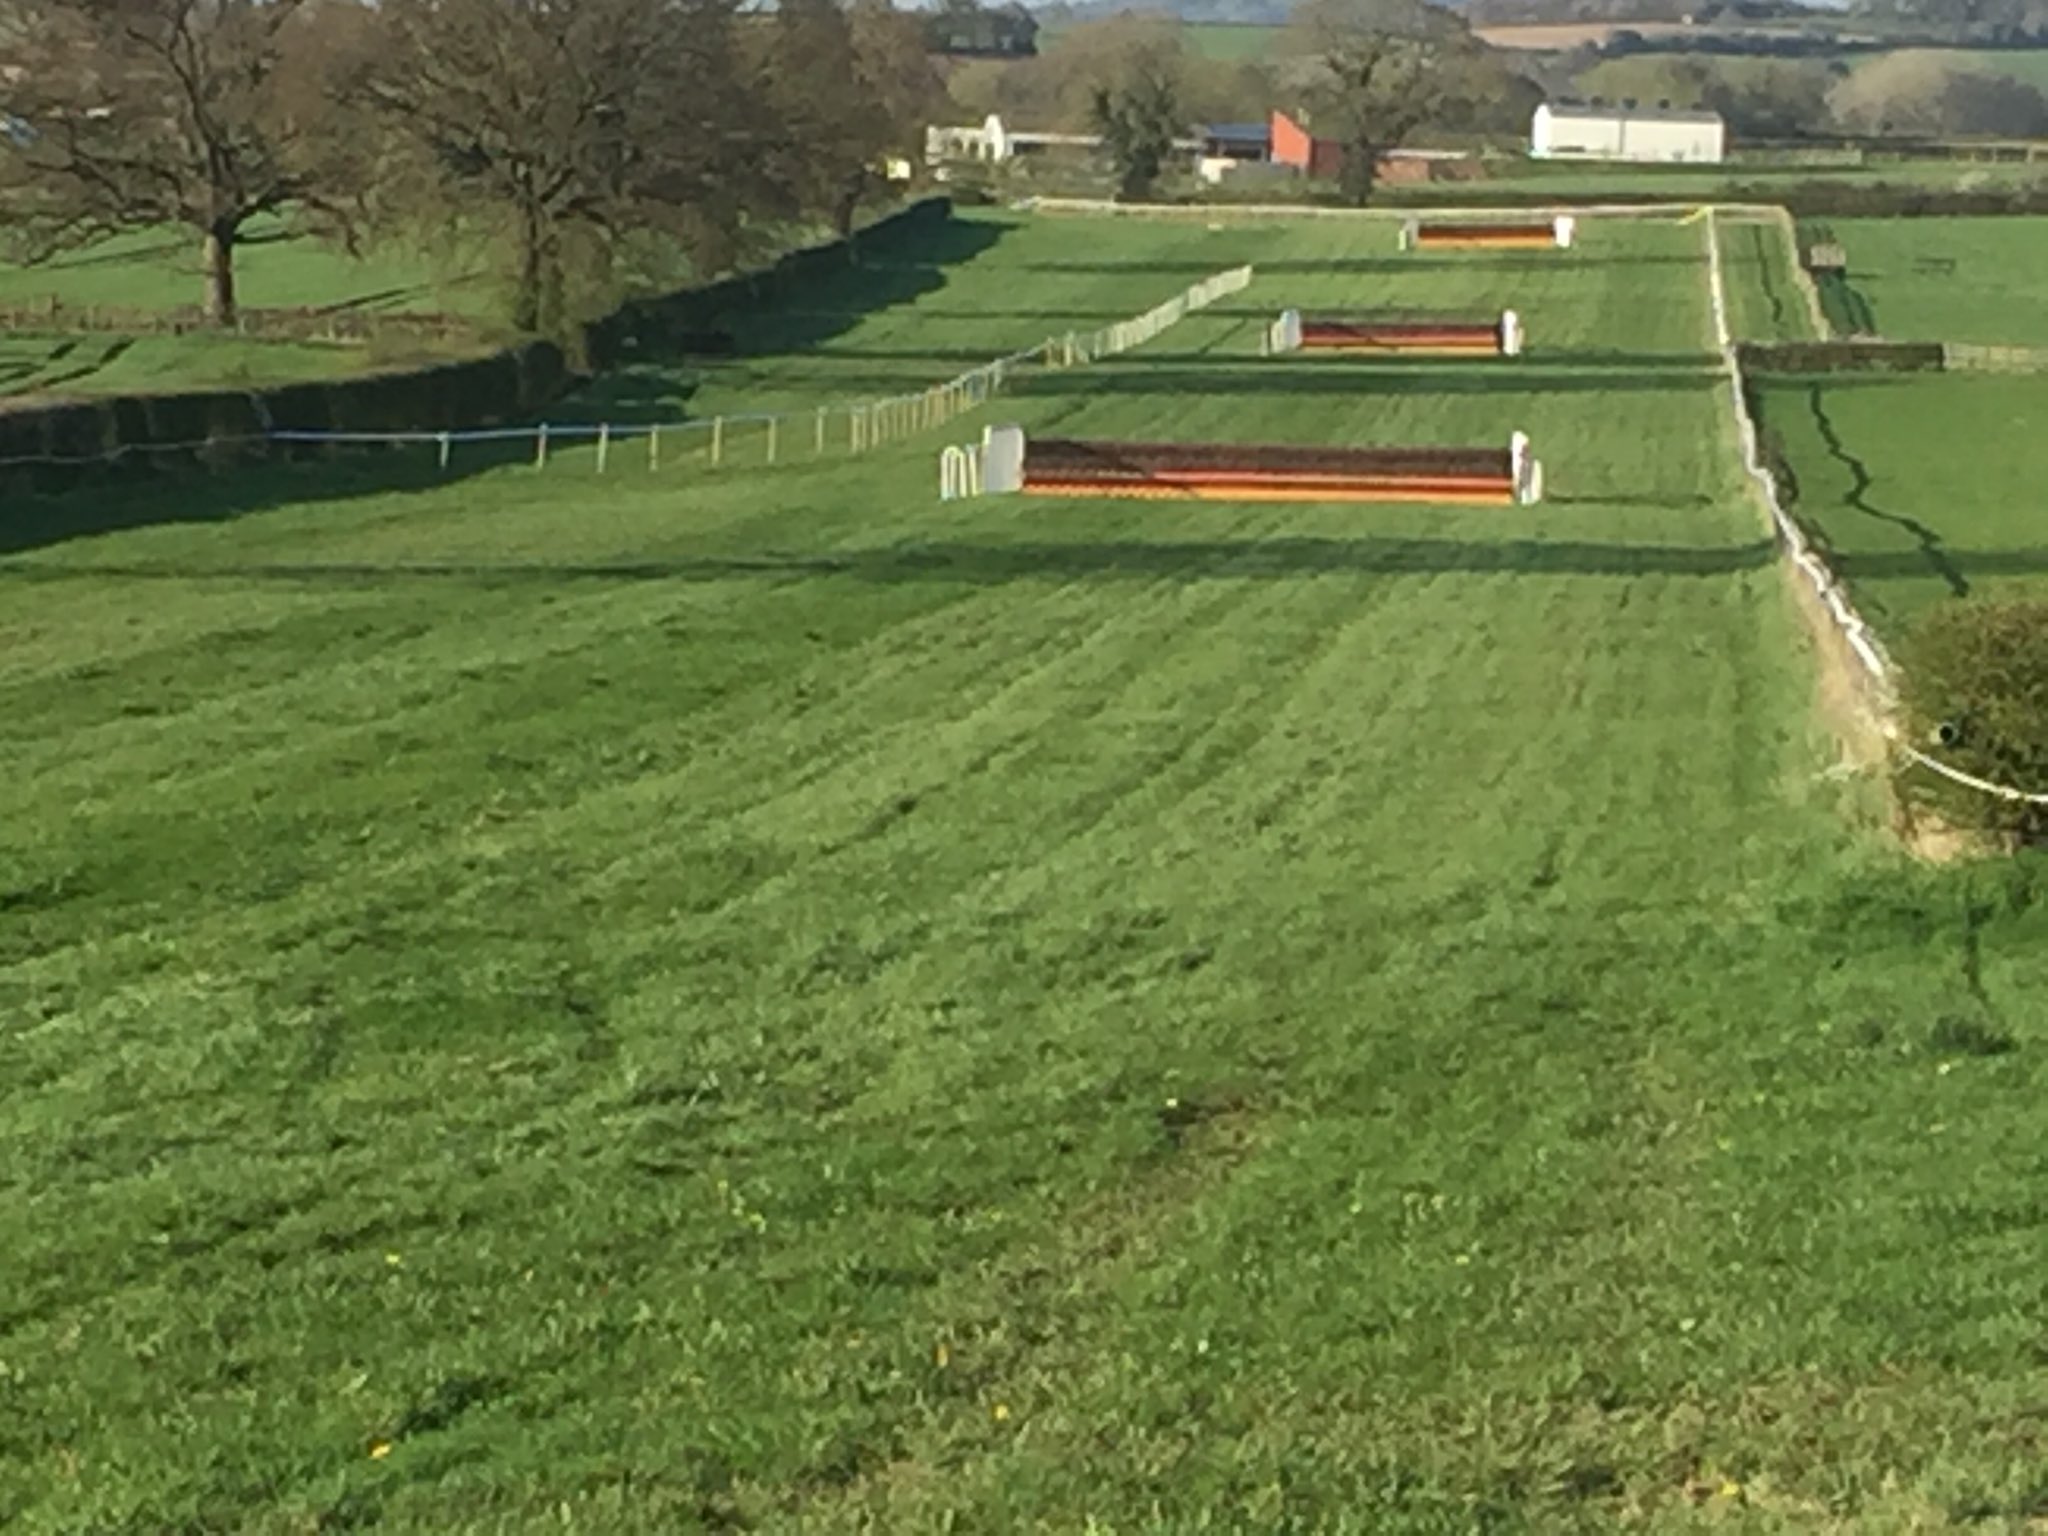 RESCHEDULED: Albrighton & Woodland (North) Point-to-Point – Saturday 23rd February 2019